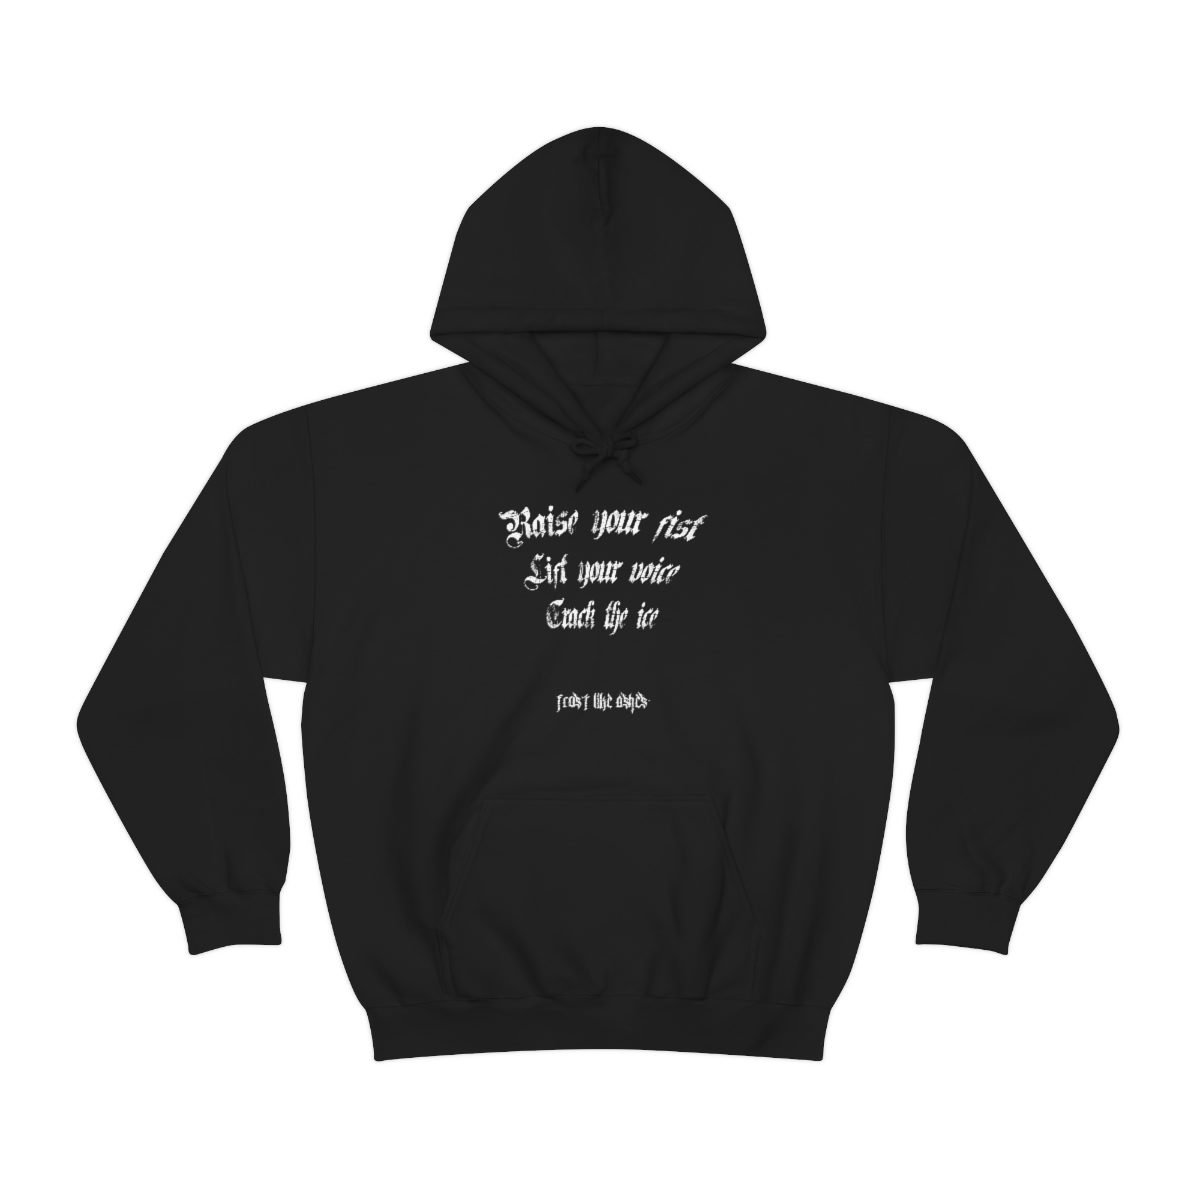 Frost Like Ashes – The Weight of Ice and Fog Pullover Hooded Sweatshirt